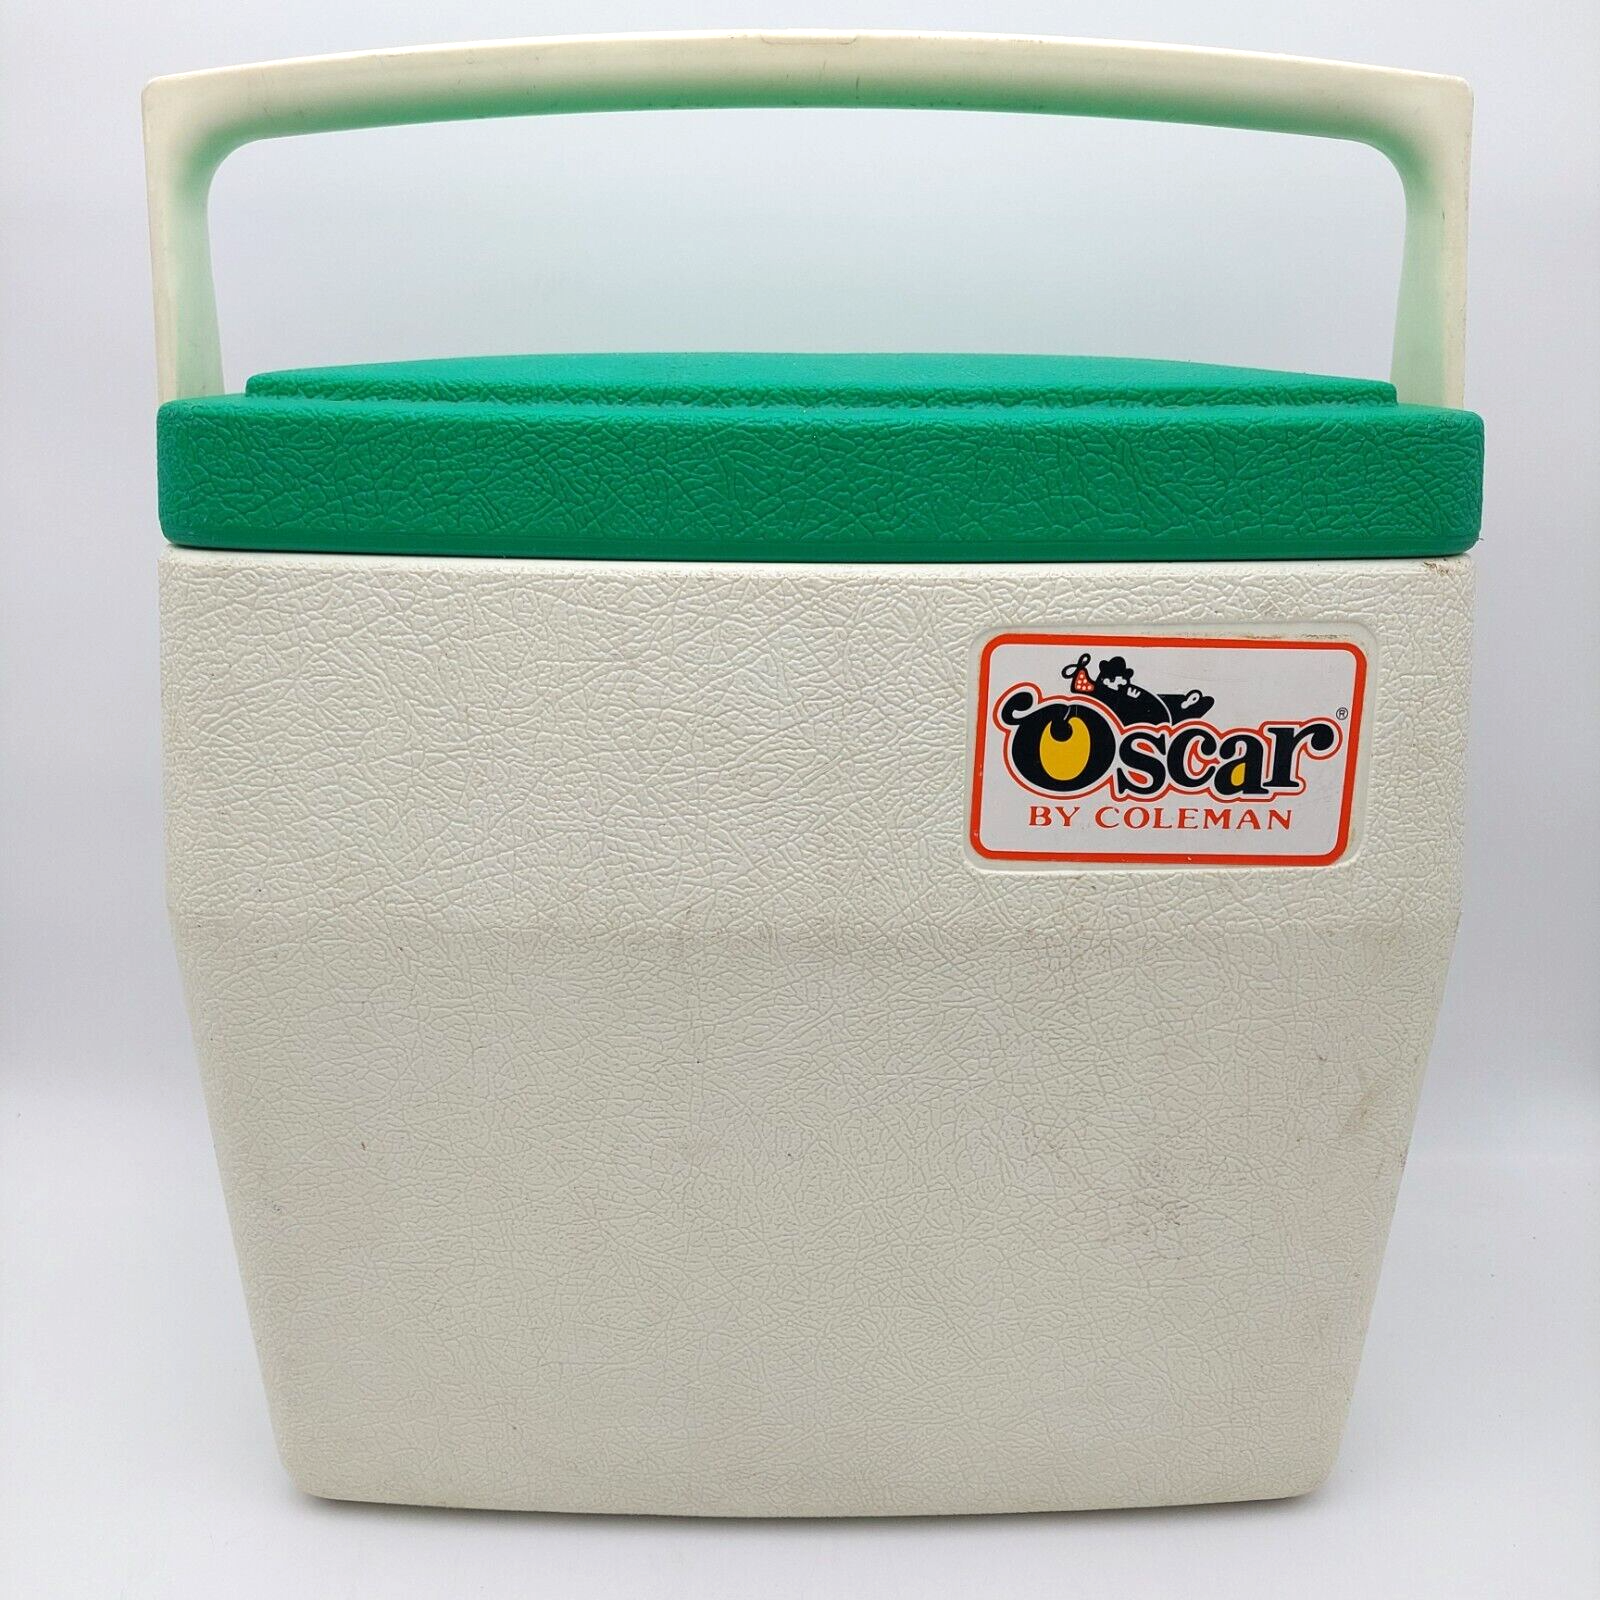 Primary image for Vtg 1981 Oscar by Coleman 16 Qt Cooler Ice Chest 5274 USA Made White w/Green Lid